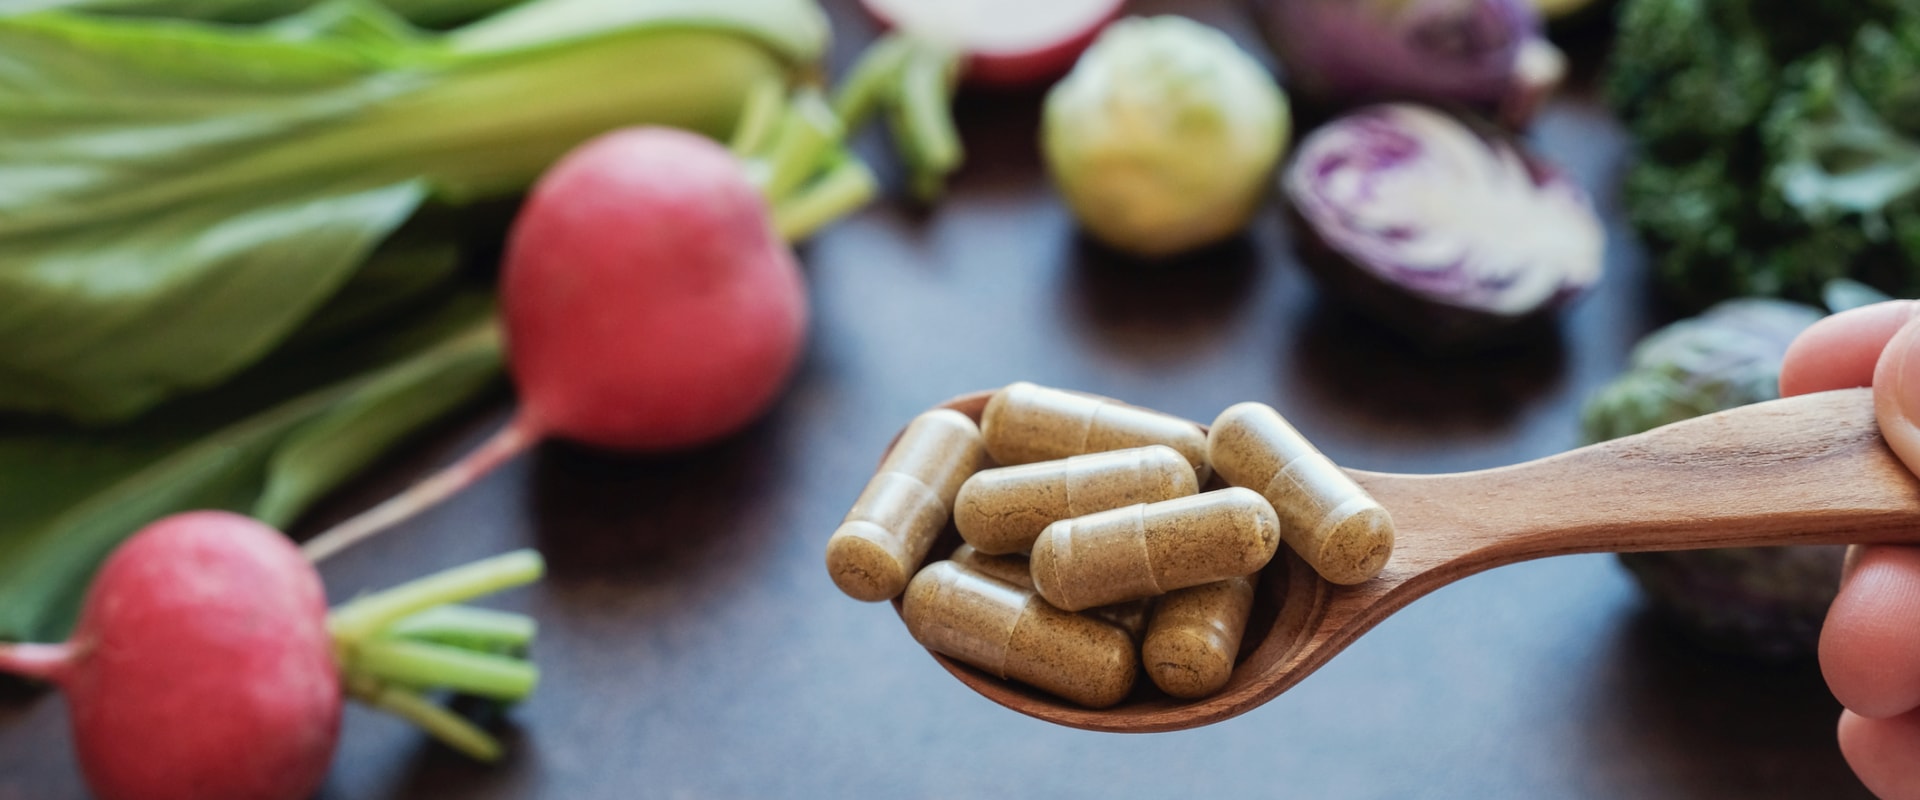 Are supplements better than real foods?